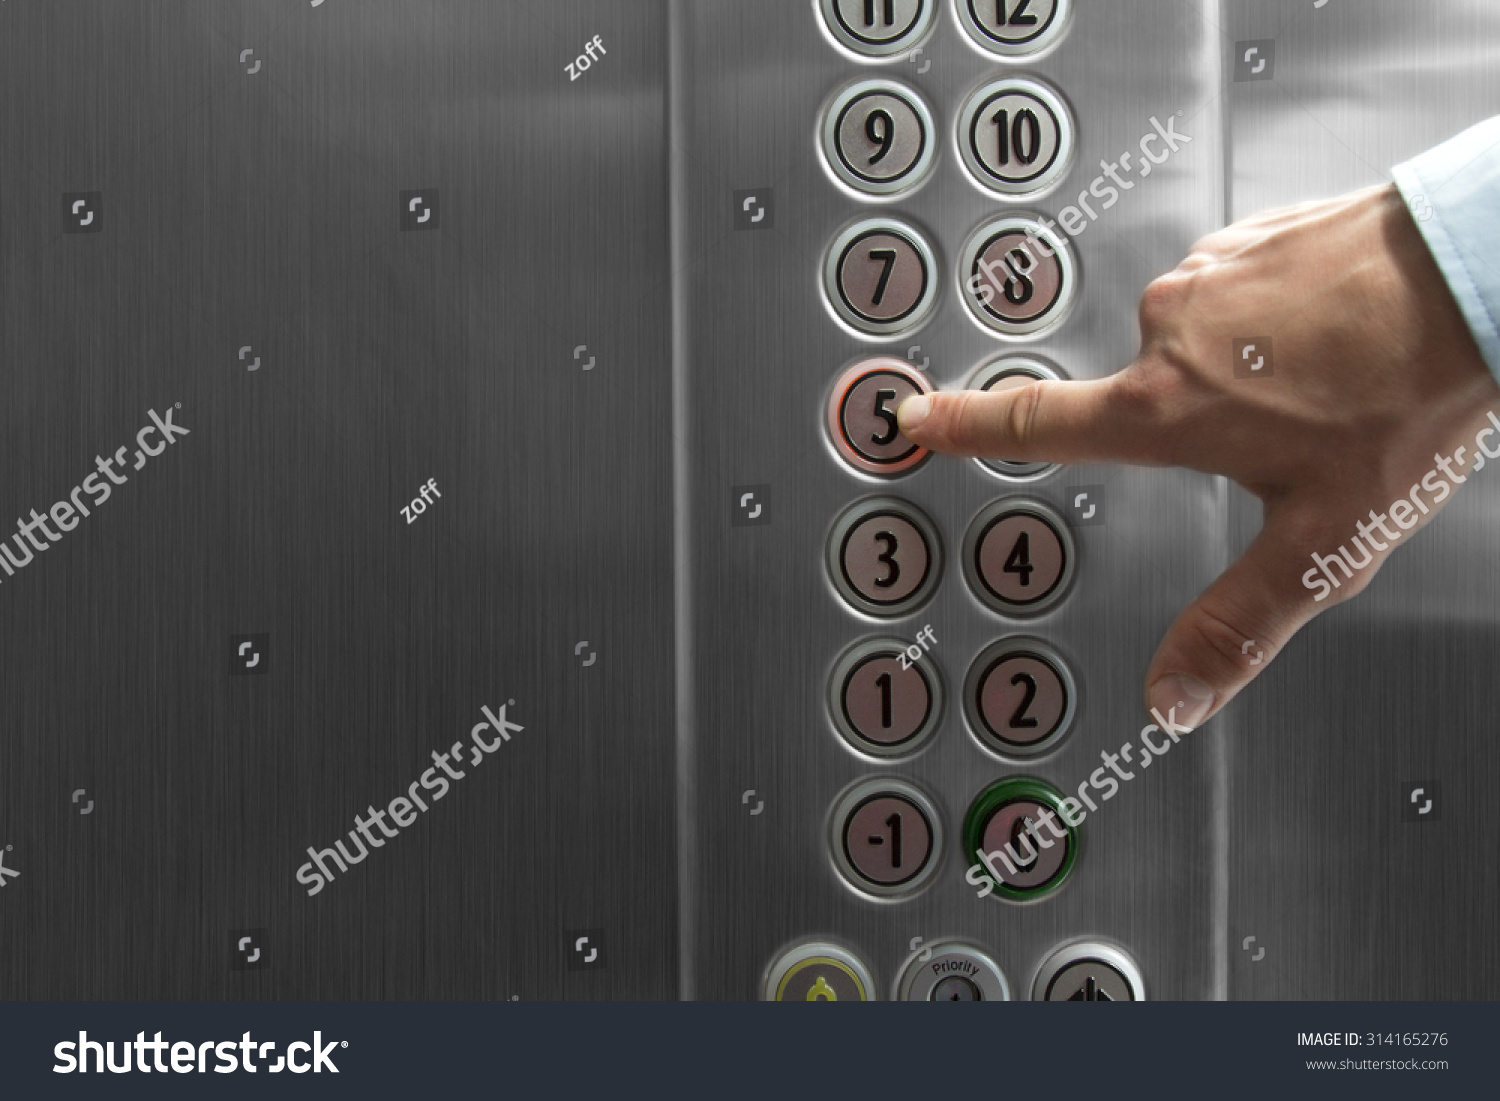 Forefinger pressing the fifth floor button in the elevator #314165276